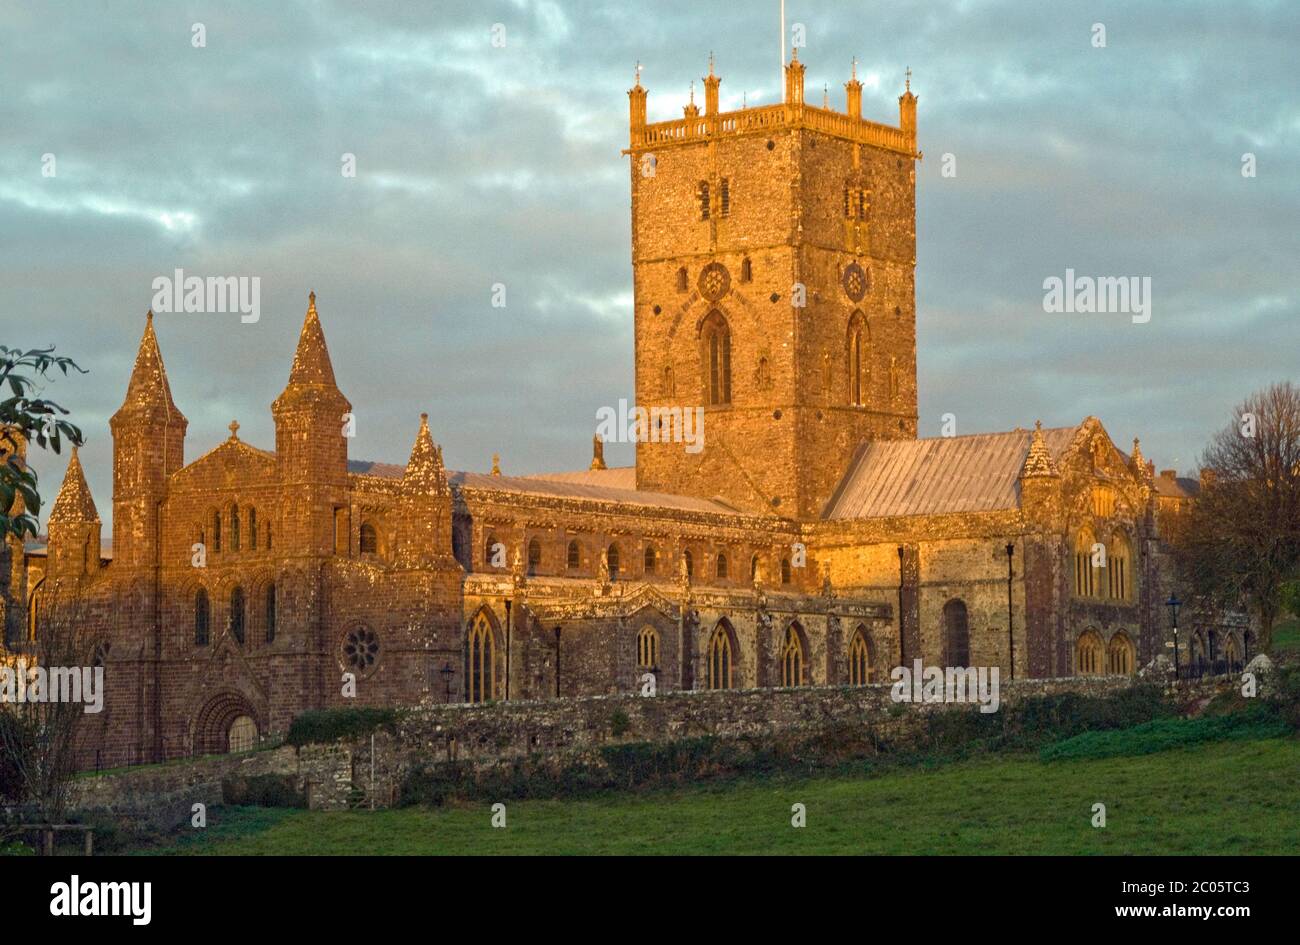 St David's Cathedral in St Davids, Pembrokeshire in the south west corner of Wales.The photograph was taken one afternoon in November as the sun shone Stock Photo